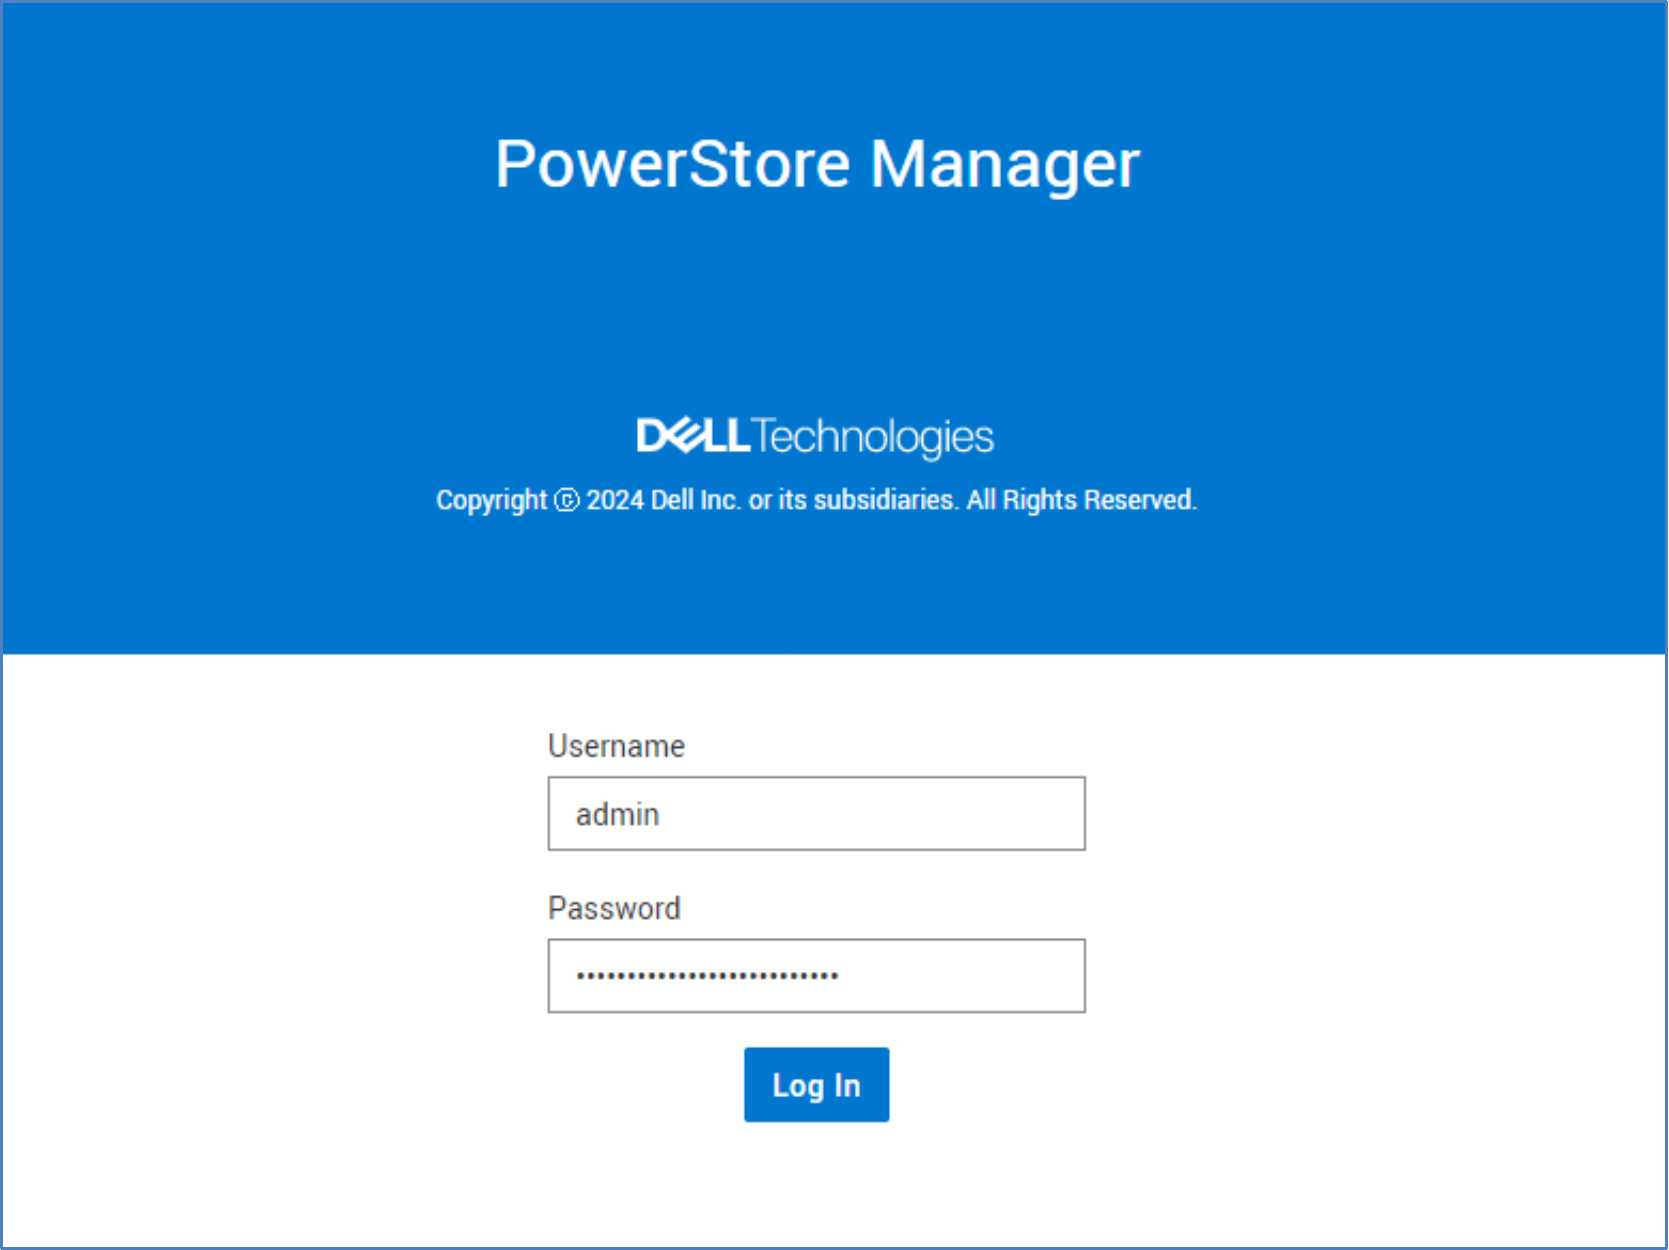 The PowerStore Manager login screen. Here the user enters the default username and password to access and configure the cluster.